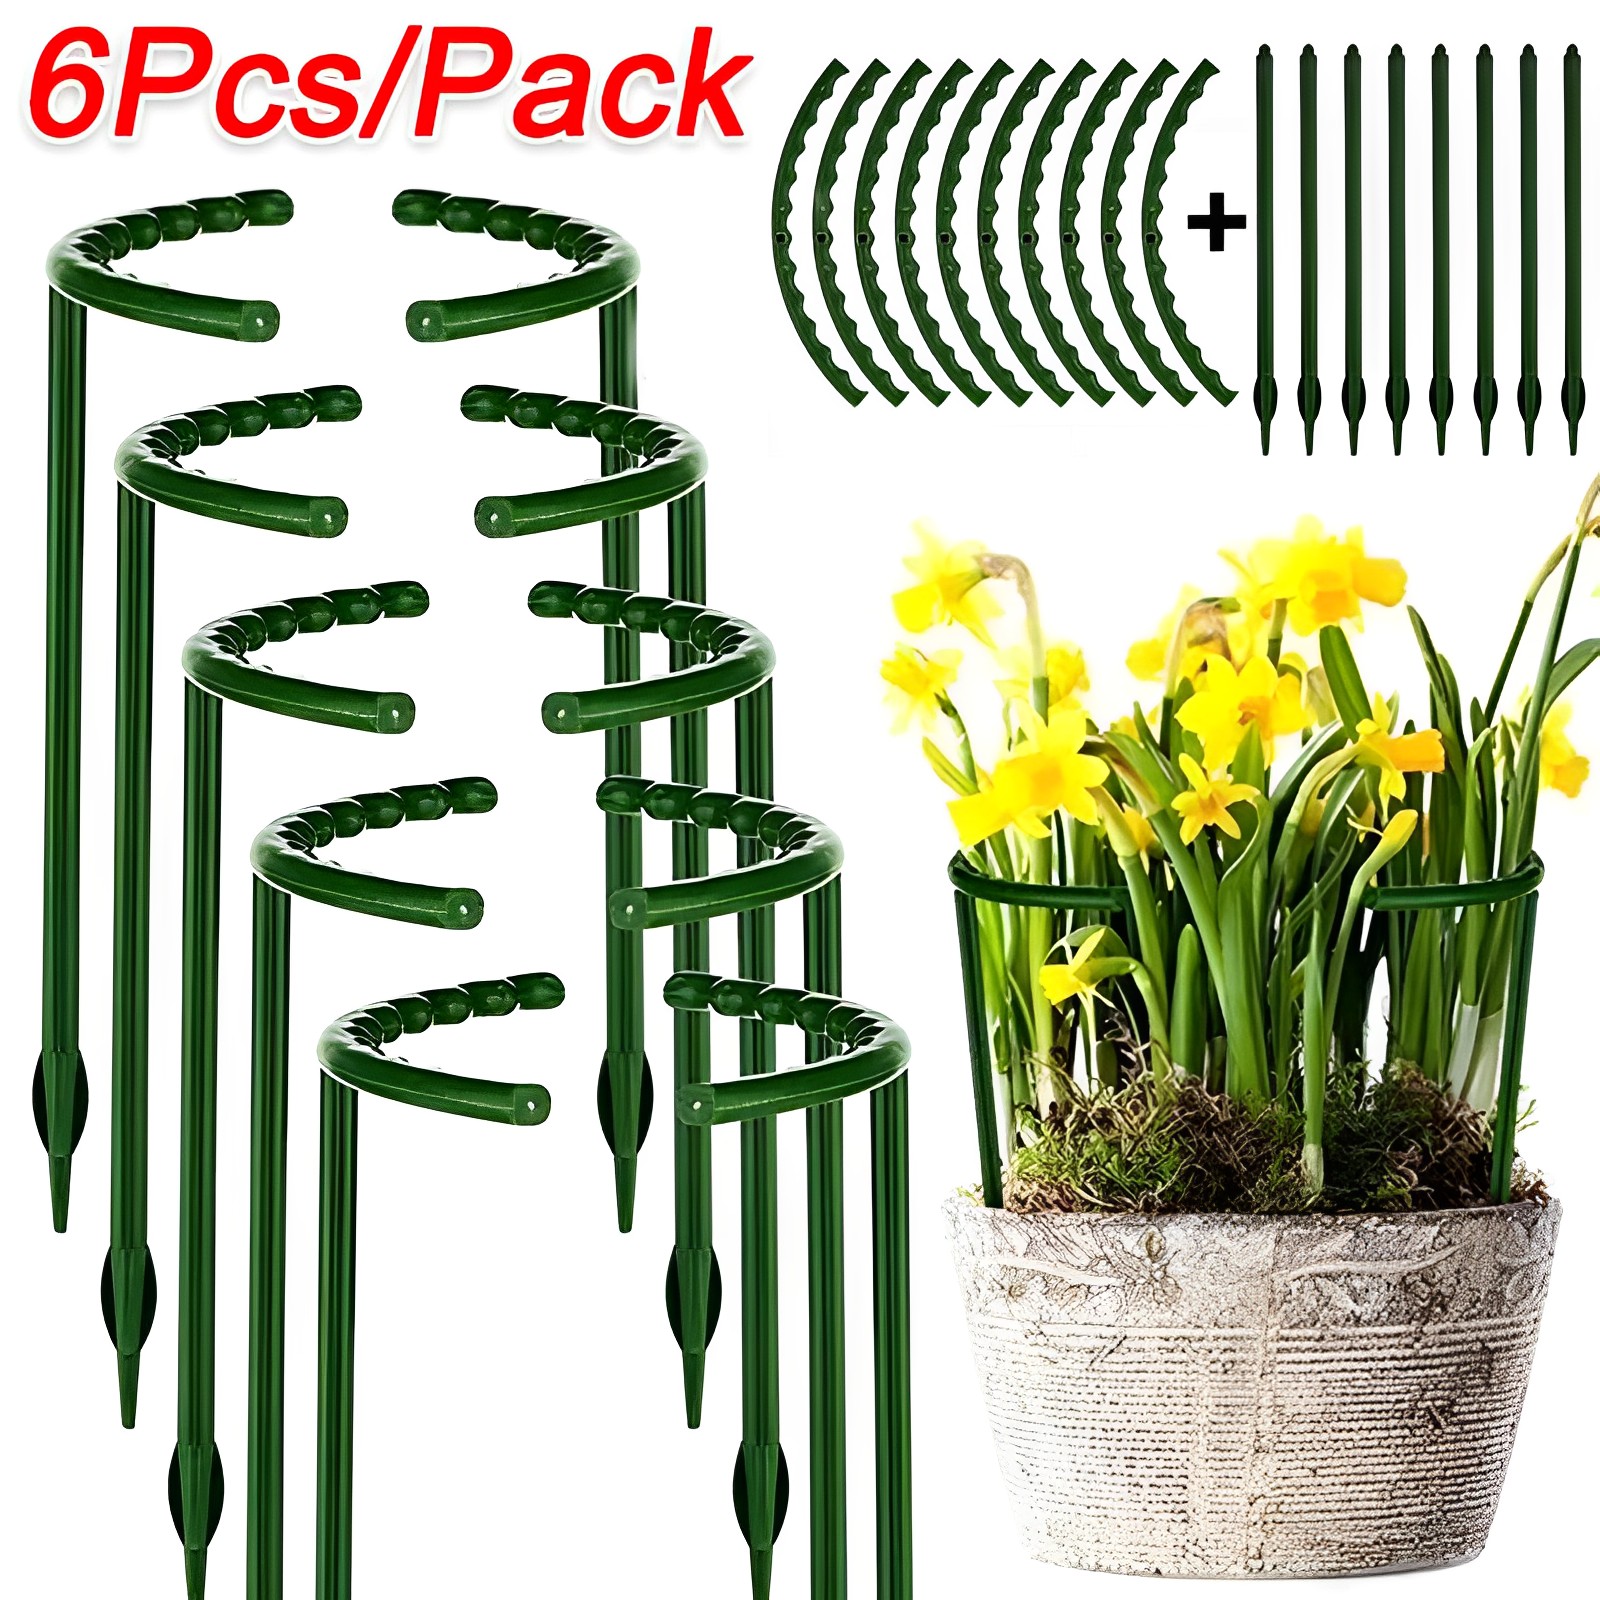 2/4/6Pcs Plastic Support Pile Stand Plant Support Pile for Flowers Greenhouses Arrangement Fixing Rod Holder Garden Tools